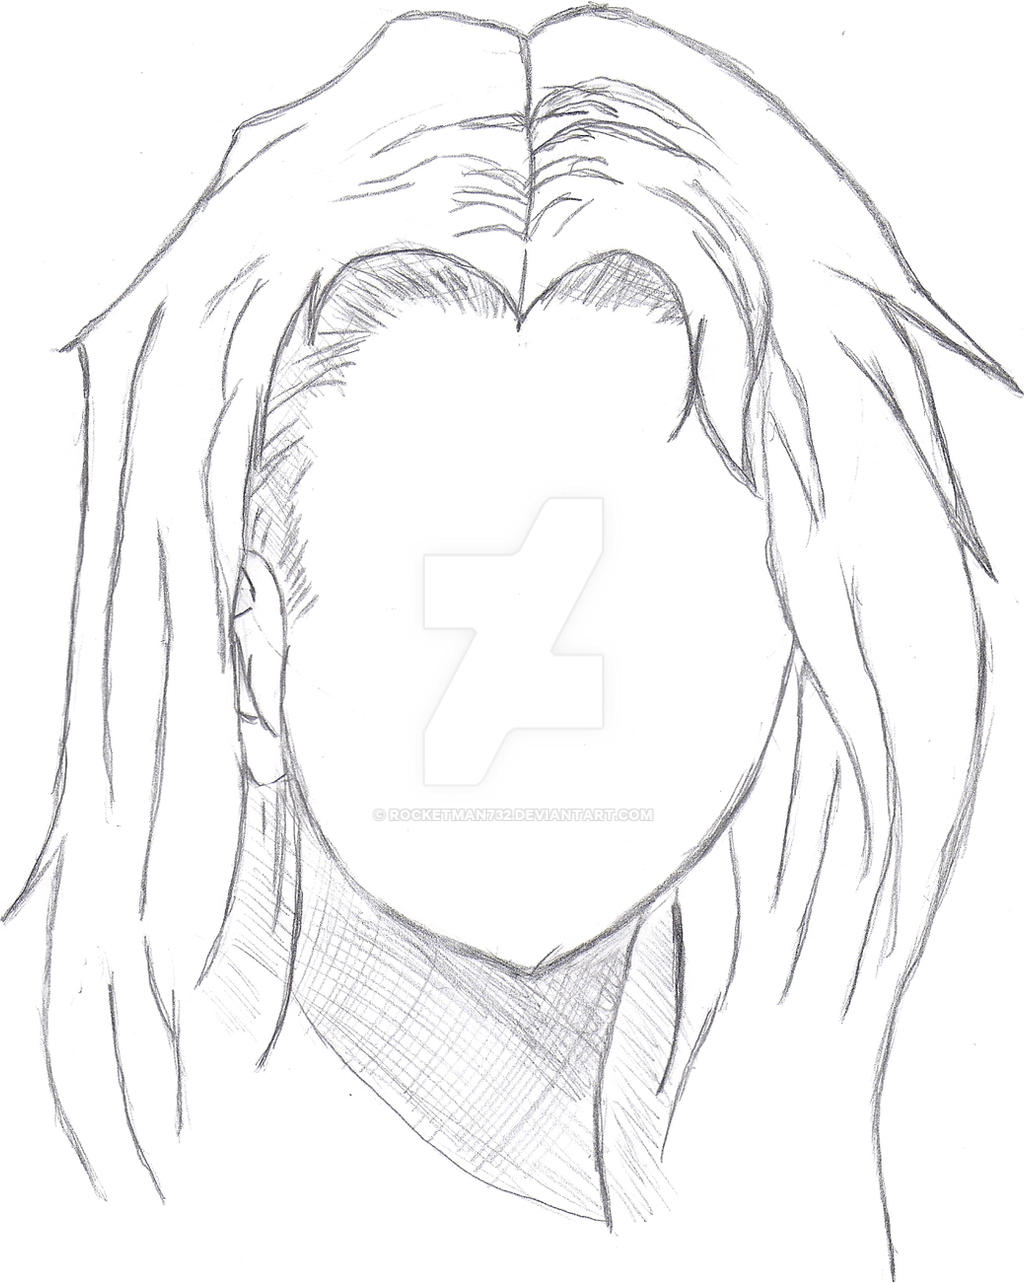 How To Draw Long Hair by rocketman732 on DeviantArt